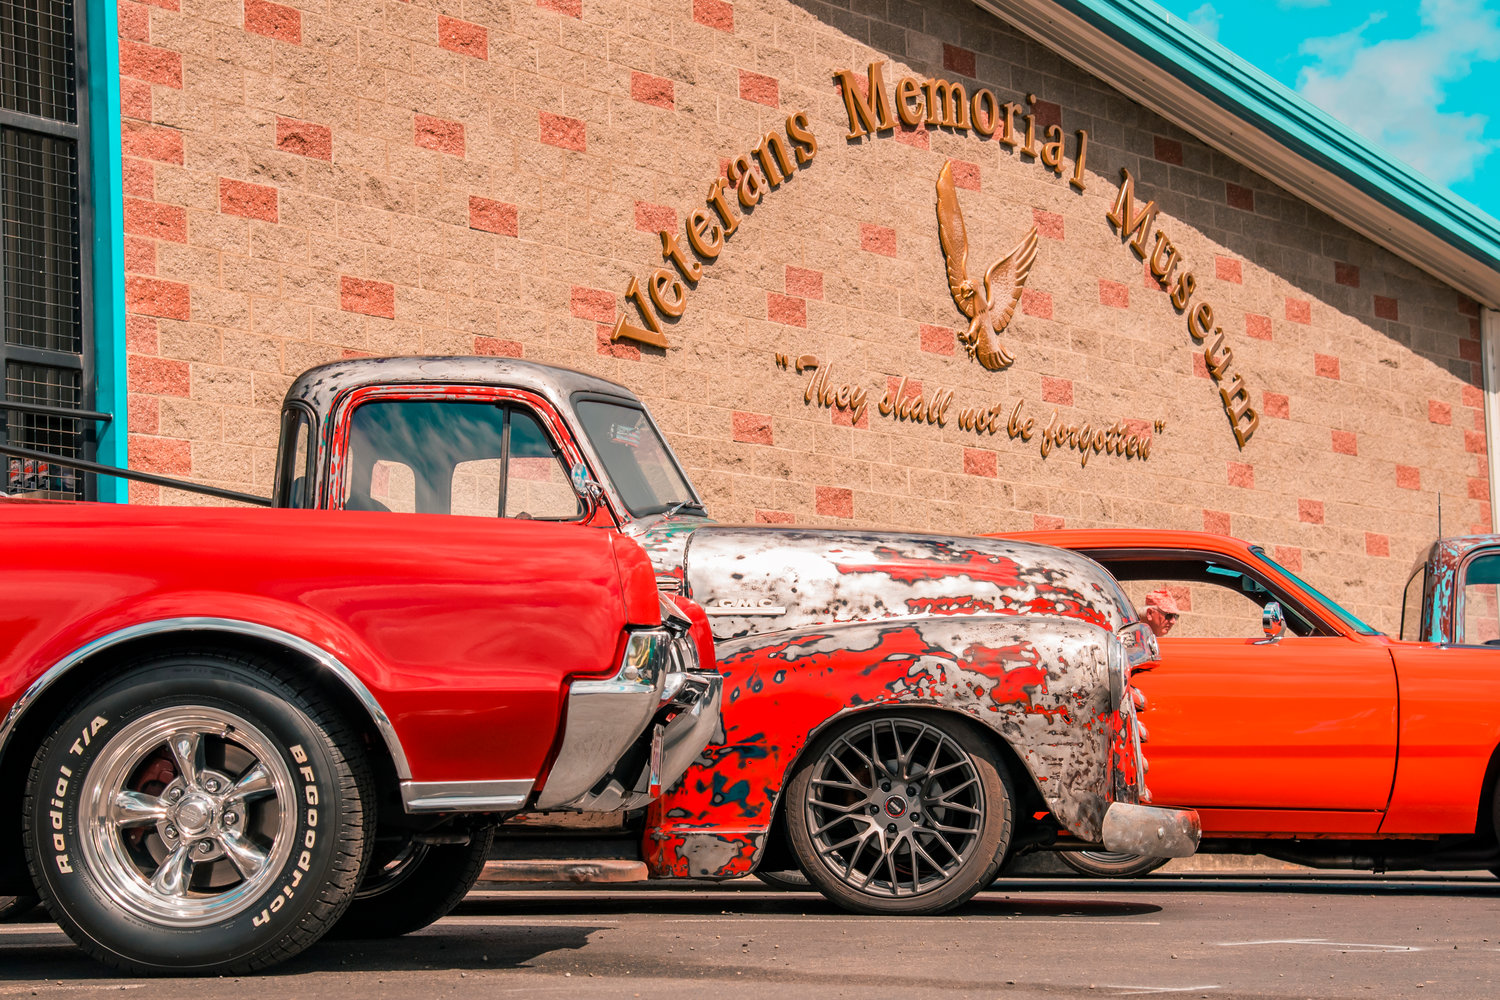 The Veterans Memorial Museum hosts the Rust or Shine Car Show and Music Festival Sunday in Chehalis.